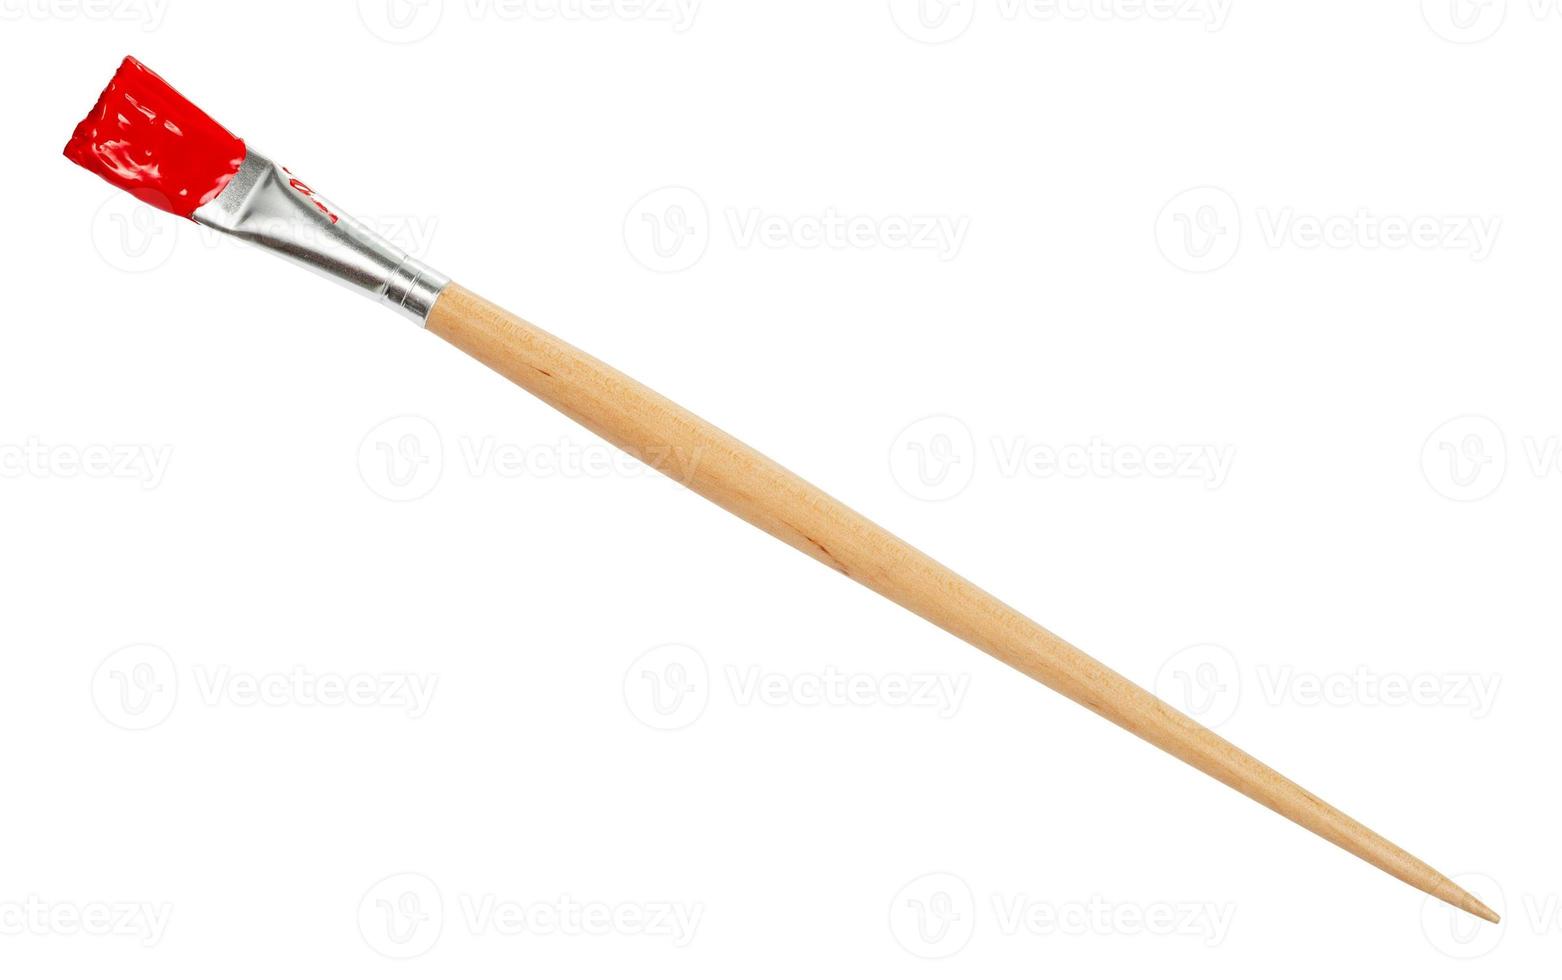 flat paint brush with red tip and wooden handle photo